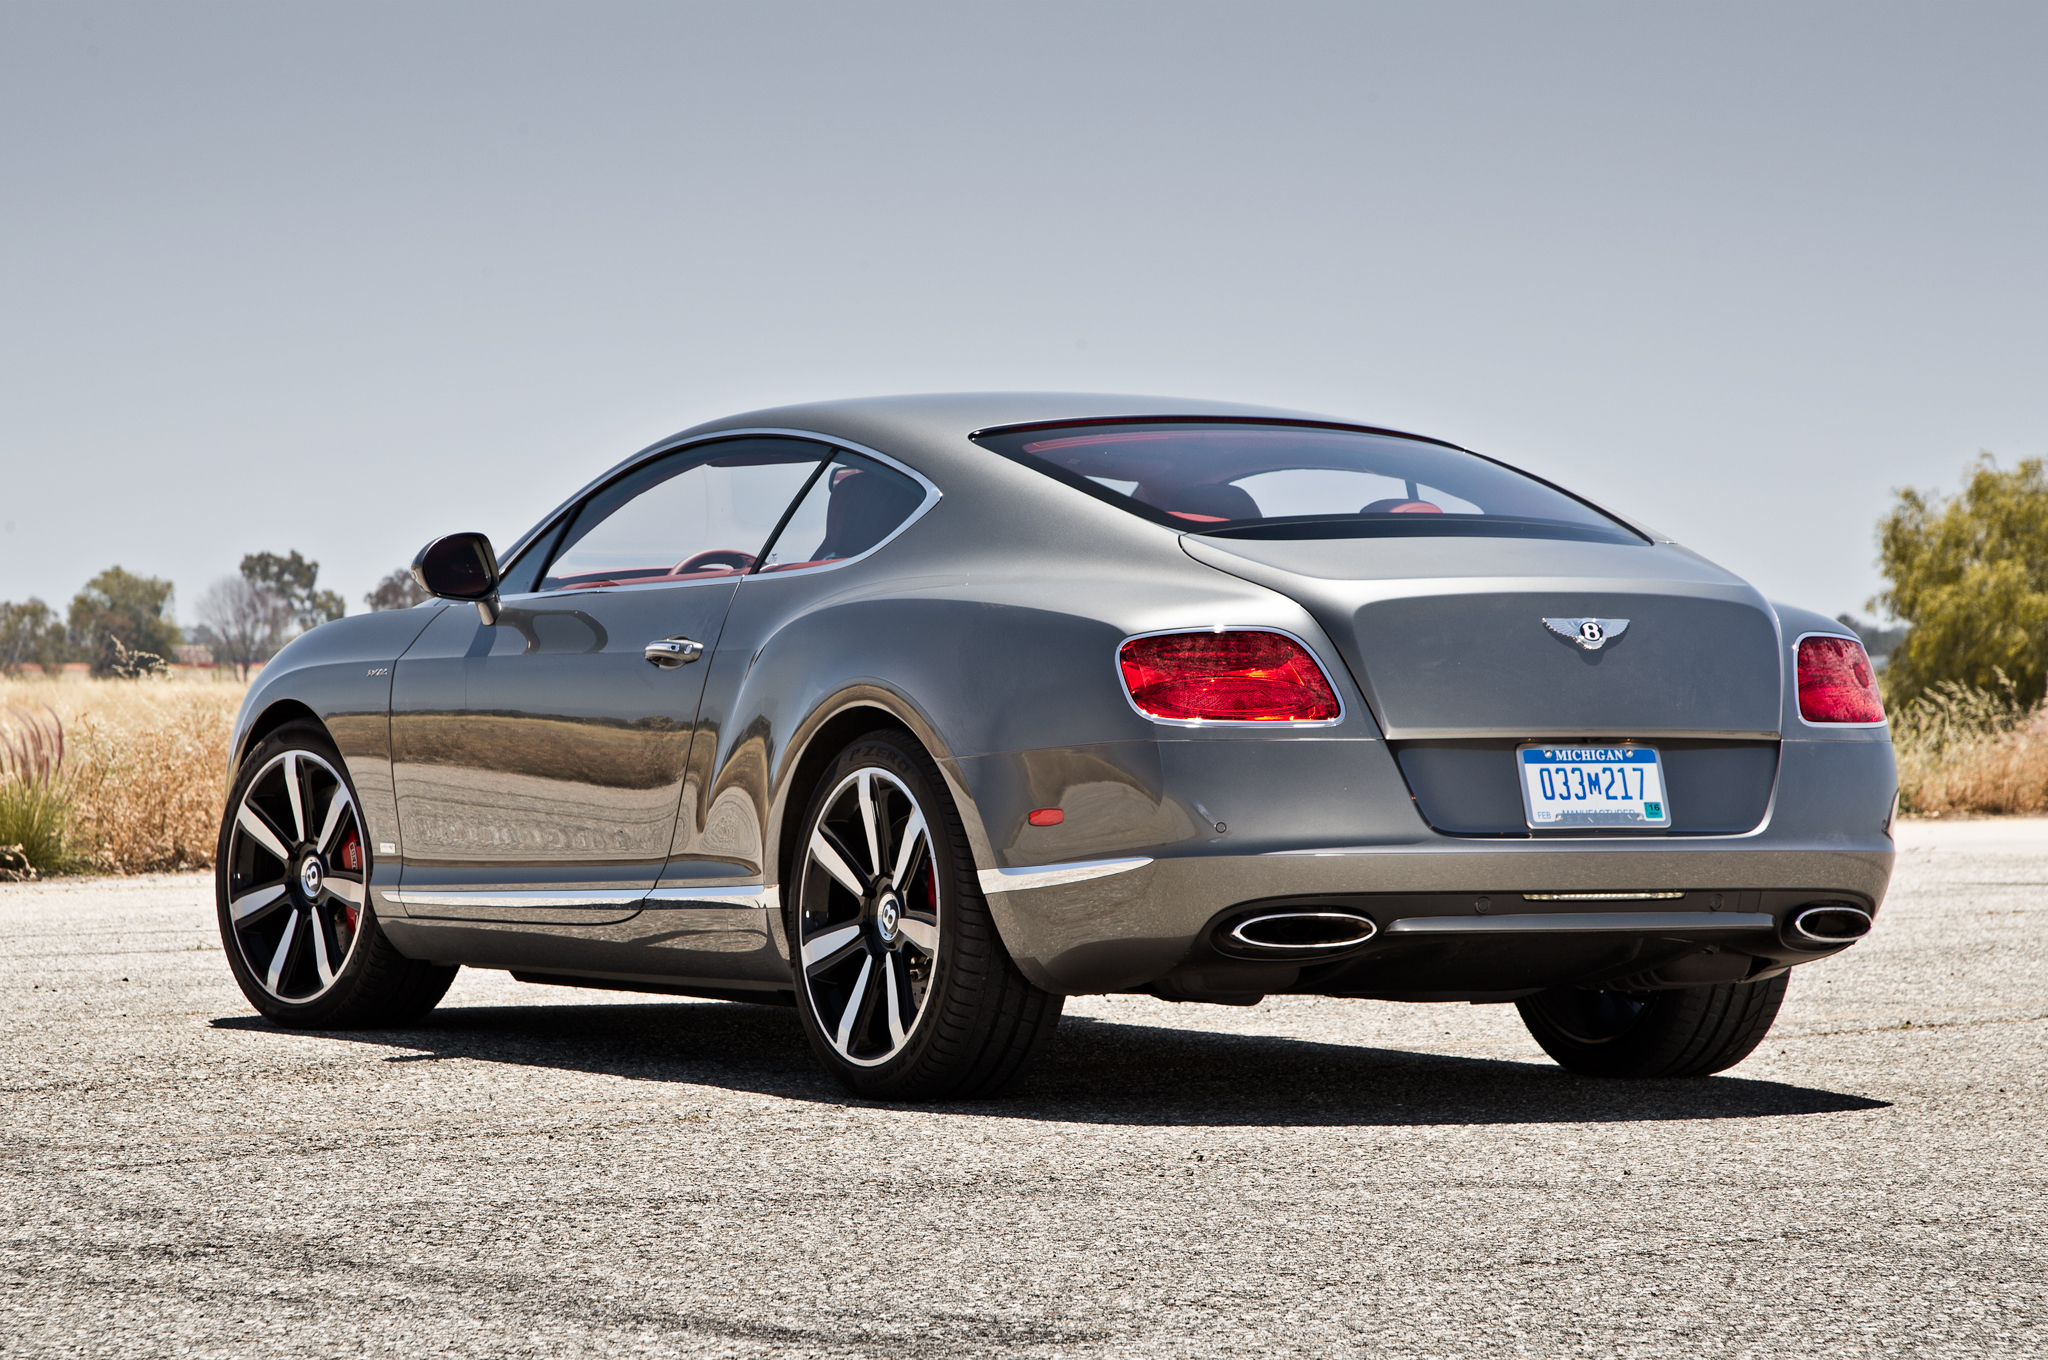 Bentley Continental GT  Backgrounds, Compatible - PC, Mobile, Gadgets| 2048x1360 px